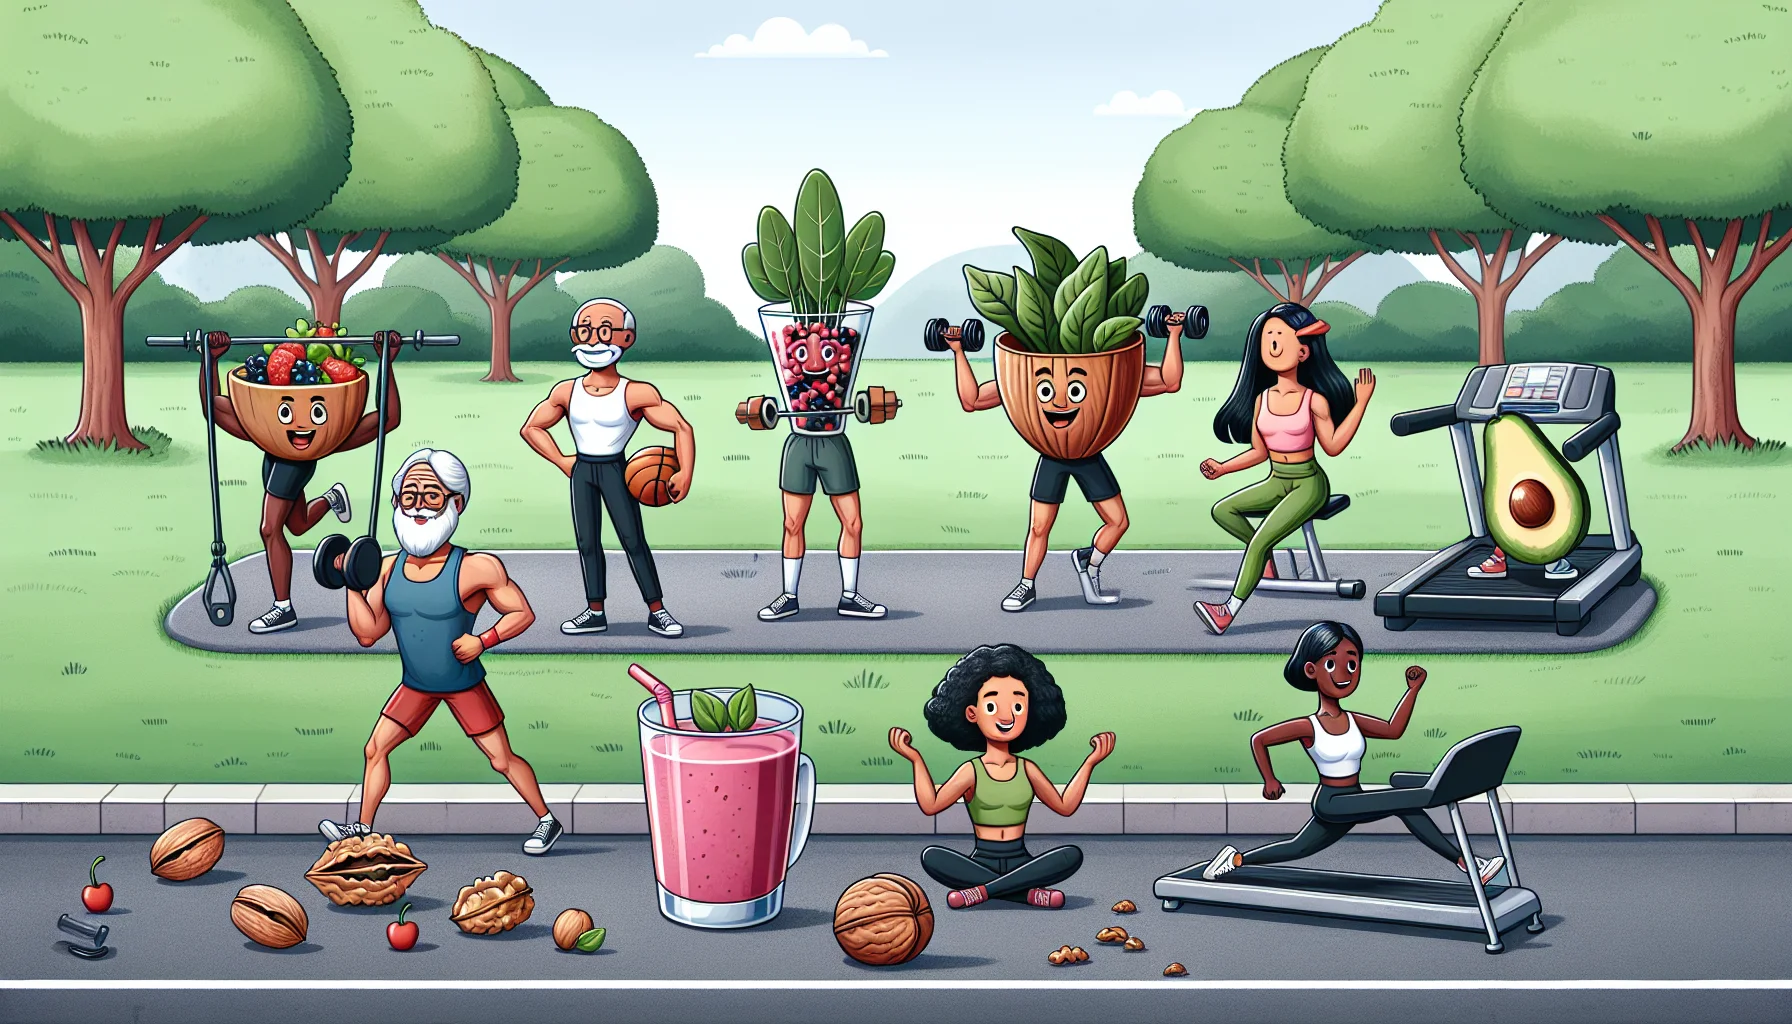 Create a humorous and appealing image depicting a setting in a park where different foods, known to help in hair restoration, are engaging in a lively workout session. Picture them with human-like features, exercising on various equipment. Include a diversity of foods such as Spinach portrayed as a middle-aged South Asian man pumping iron, a berry smoothie as a young Black woman running on a treadmill, walnuts visualized as an elderly Caucasian man doing yoga, and an avocado embodied as a Hispanic female child doing jumping jacks. This playful representation links healthy eating and physical activity for hair health.